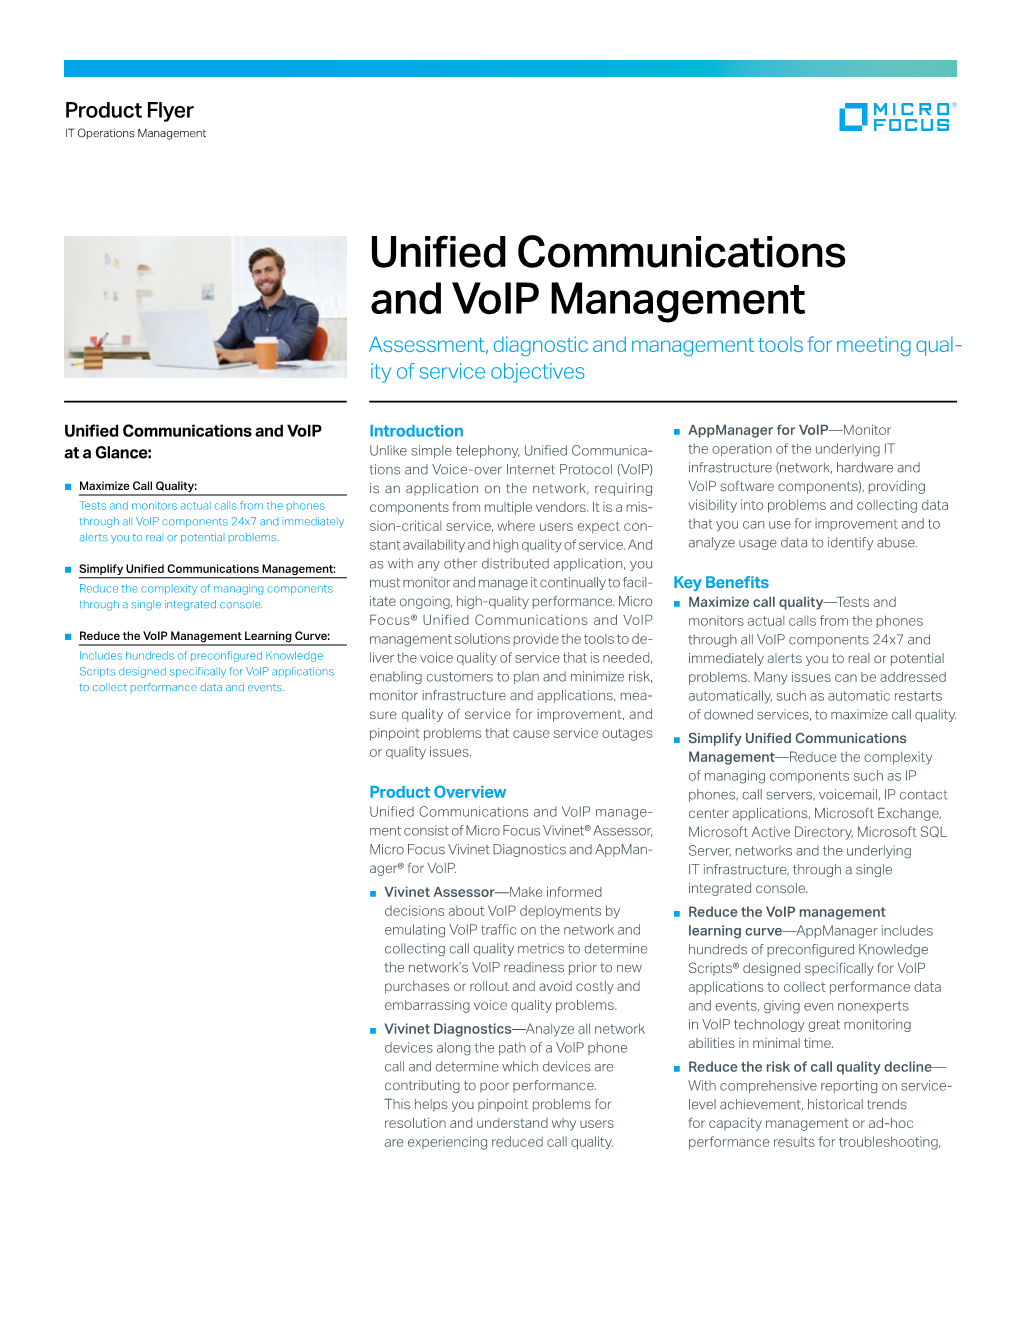 Unified Communications and Voip Management Assessment, Diagnostic and Management Tools for Meeting Qual­ Ity of Service Objectives